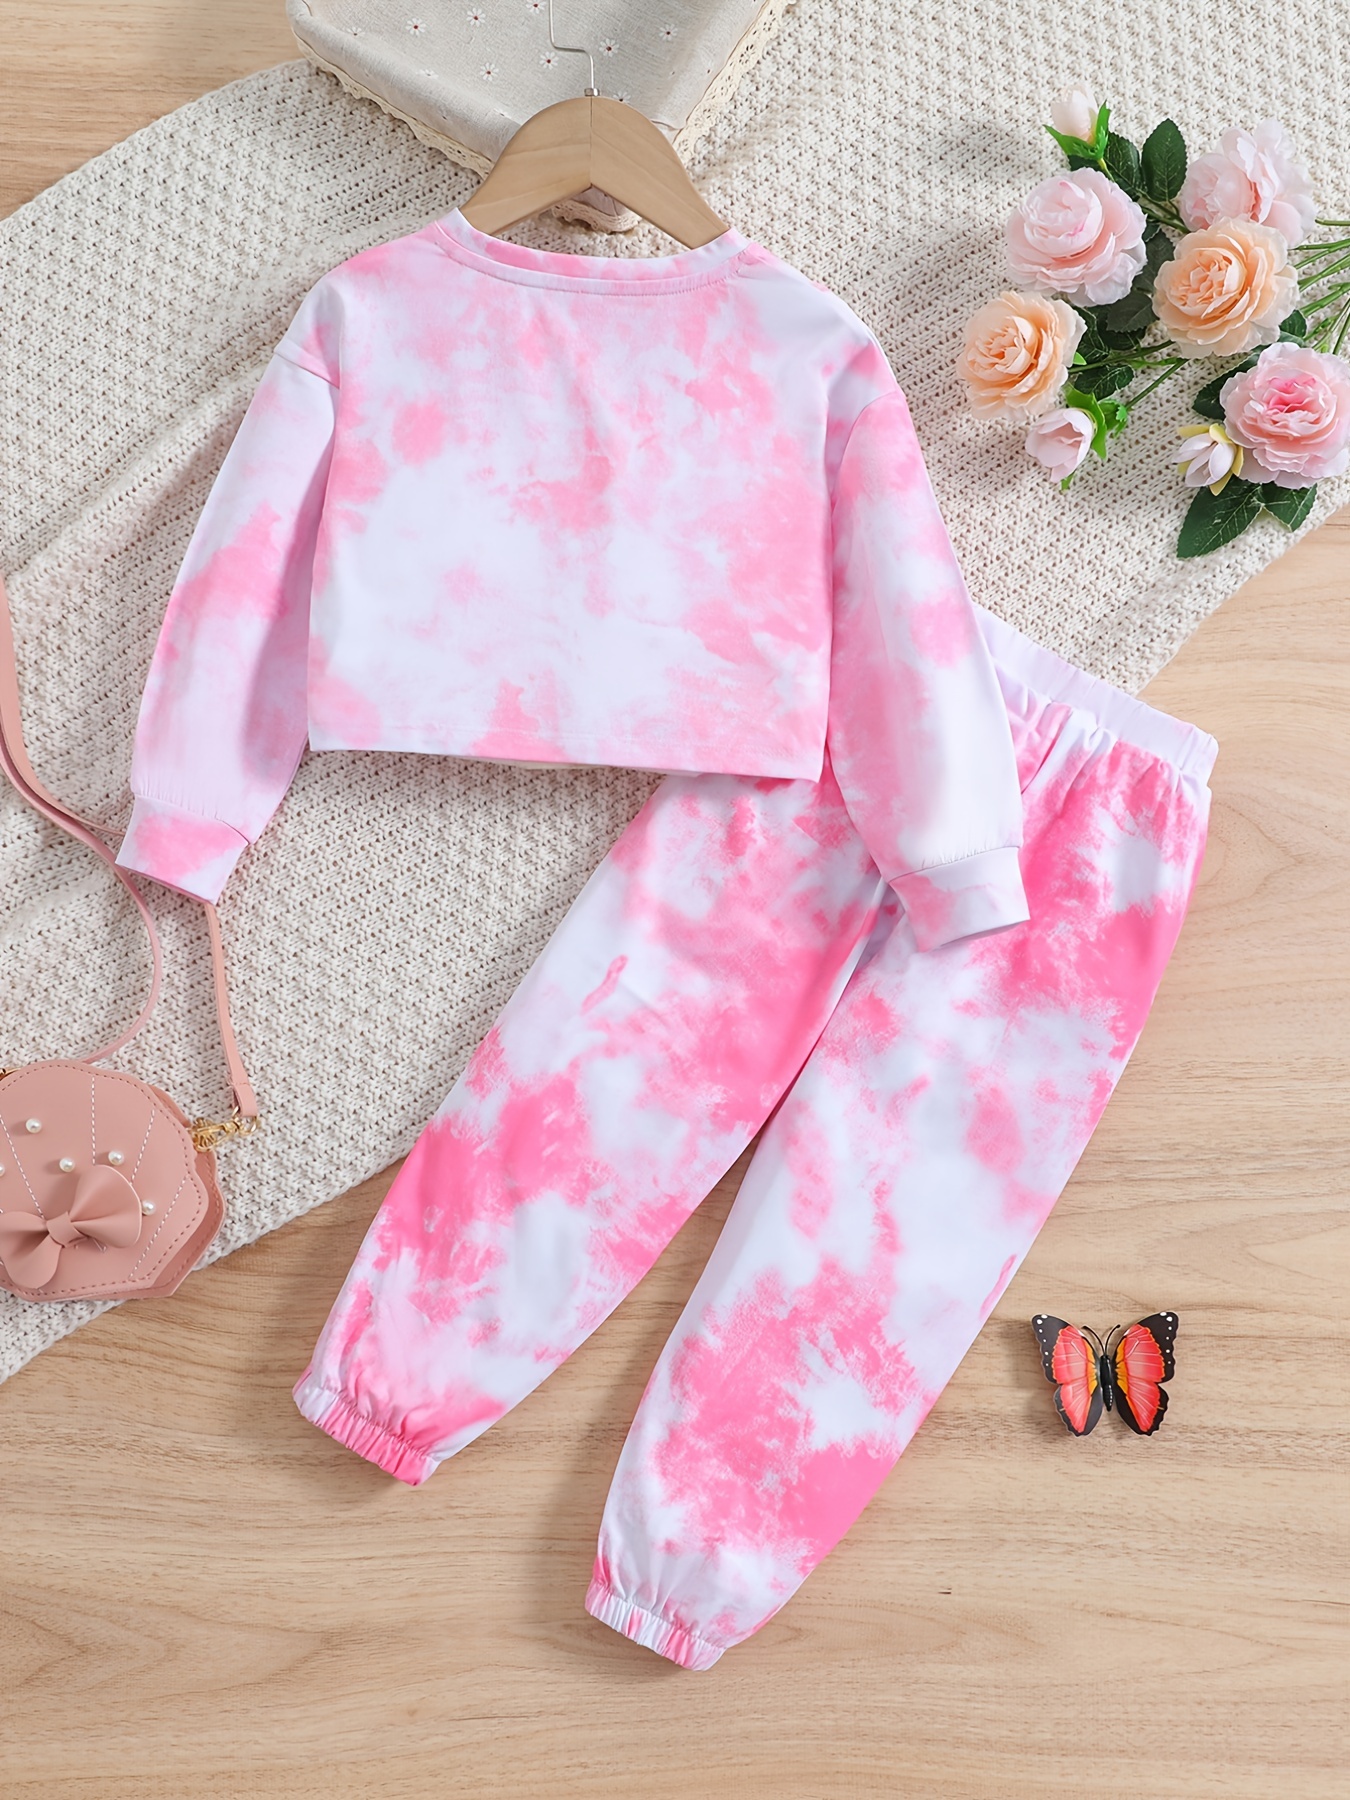 Toddler Girls Butterfly Embroidery Tie Dye Top Long Sleeve Tee Shirt And  Sweat Pants 2pcs Sportswears Y1-Y8